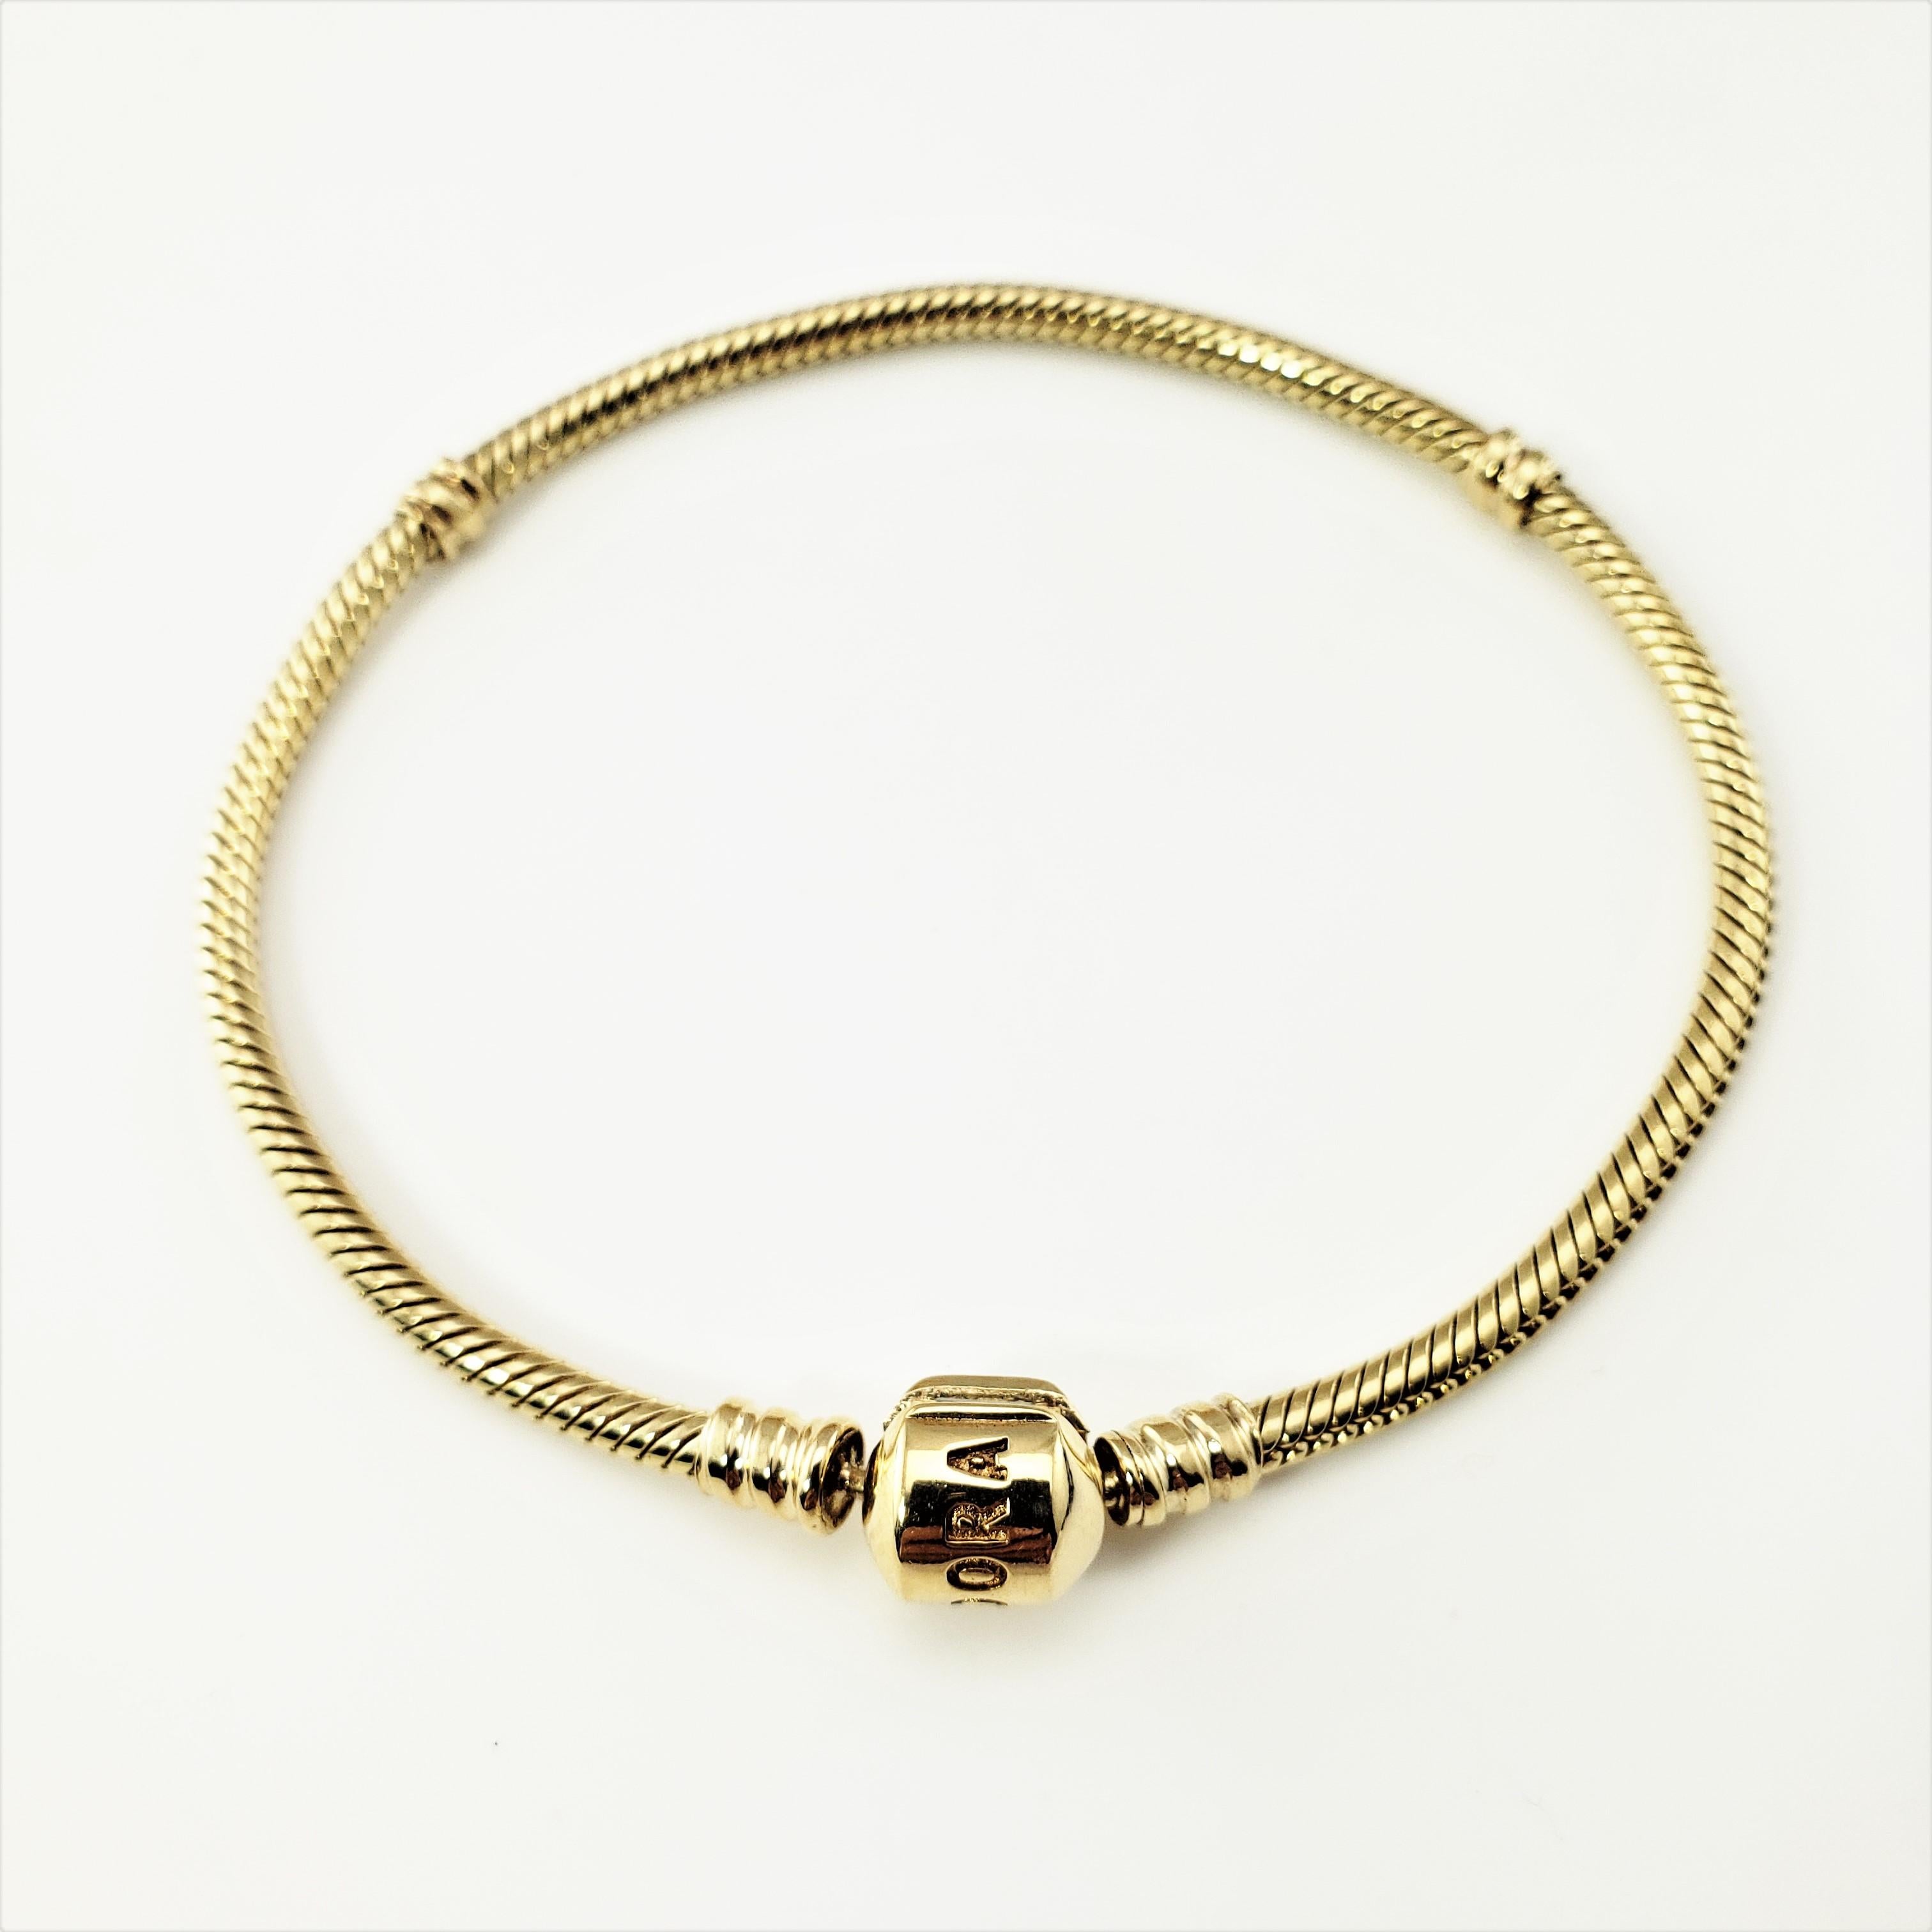 Pandora 14 Karat Yellow Gold Bracelet-

This classic charm bracelet by Pandora has a barrel clasp and is the perfect way to showcase your Pandora charm collection!

Size:  7.5 inches 

Width:  3 mm

Weight:  11.6 dwt. /  18.1 gr.

Hallmark:  PANDORA